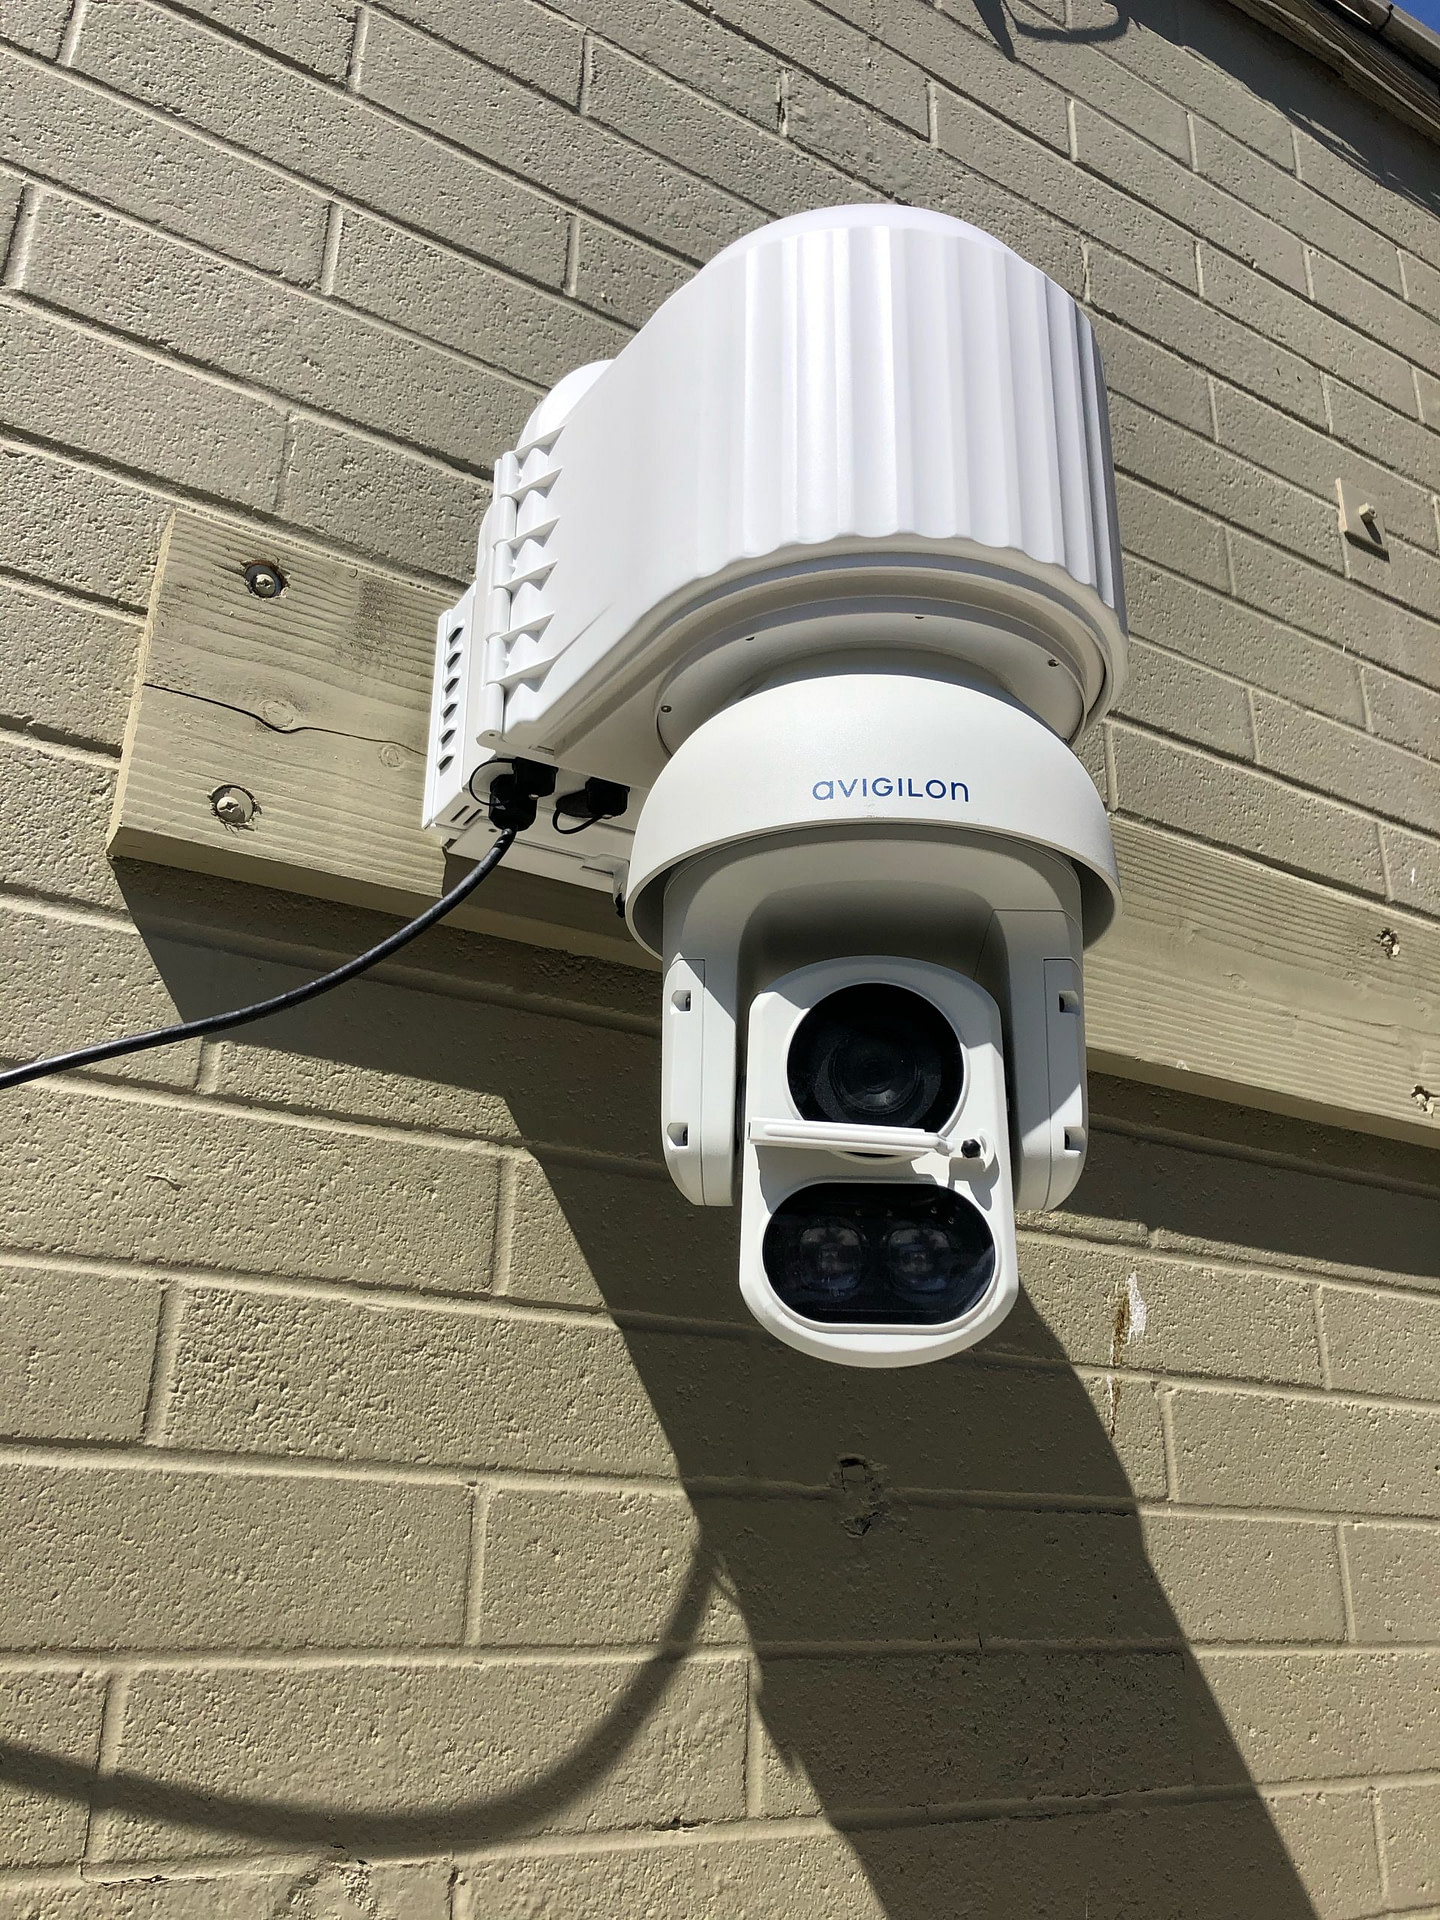 XCold PTZ Camera Enclosure System For Extreme Heat Environments Integrated With An Avigilon PTZ Camera With IR And Wiper Blade 